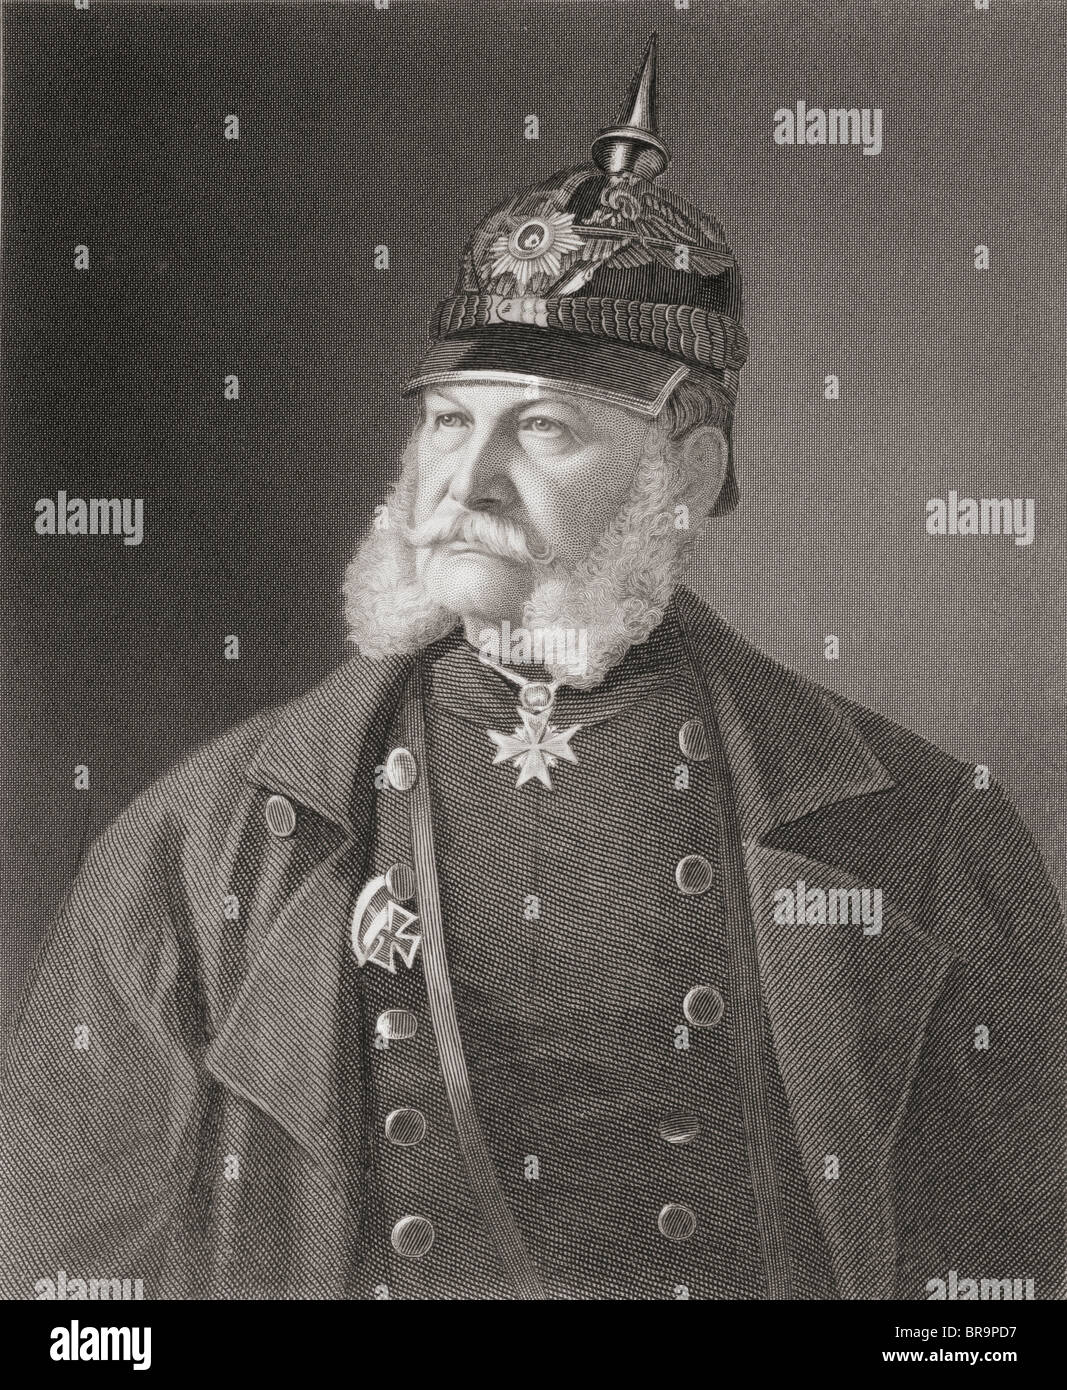 William I aka Wilhelm I, 1797 to 1888. King of Prussia and first German Emperor . Stock Photo